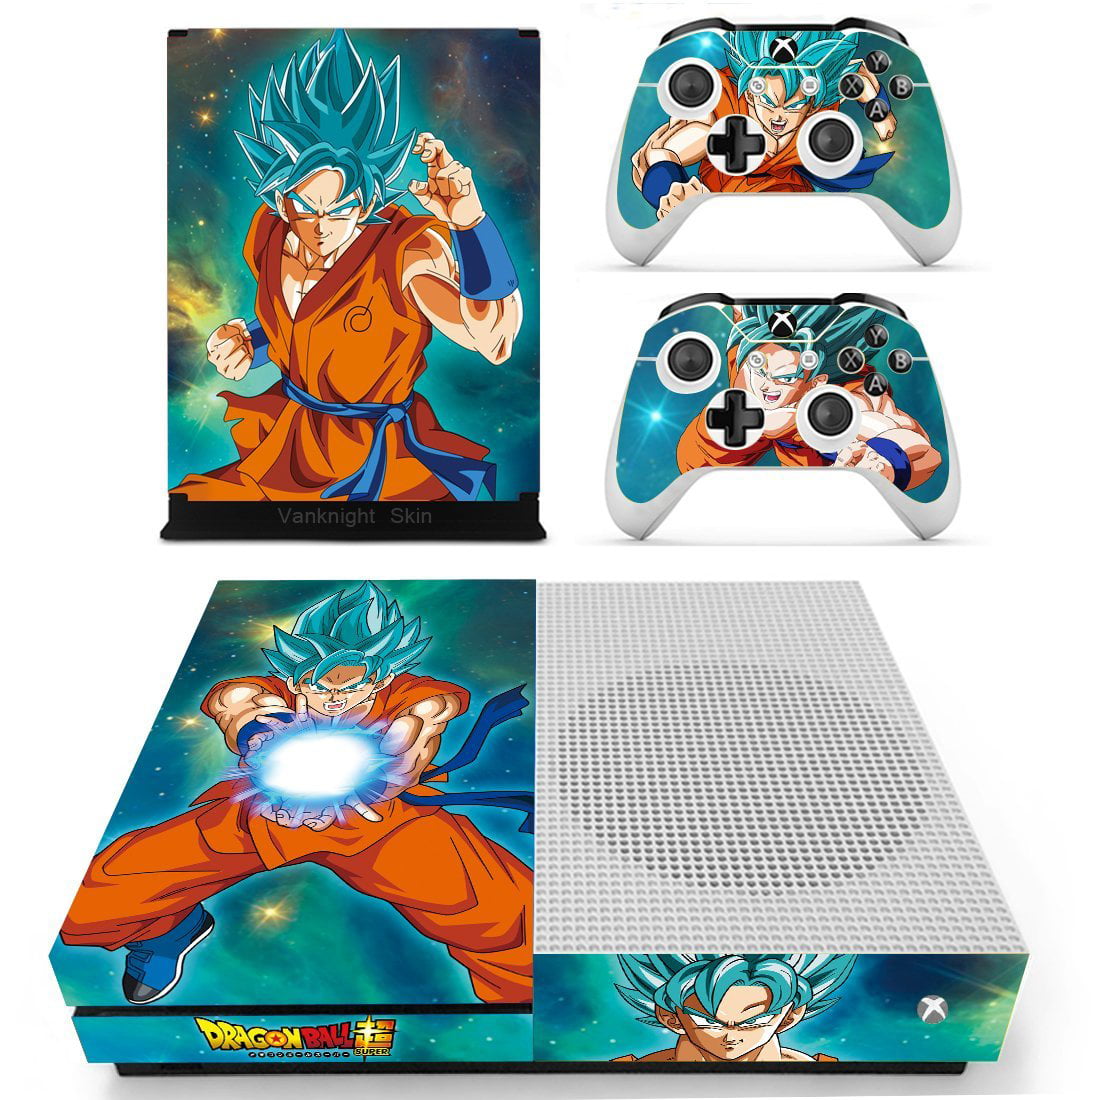 Vanknight Xbox One S Slim XB1 S Console 2 Controllers Remote Skin Set Vinyl Skin Decals Stickers Covers Wrap for XB1 S Anime DBZ Vegeta 